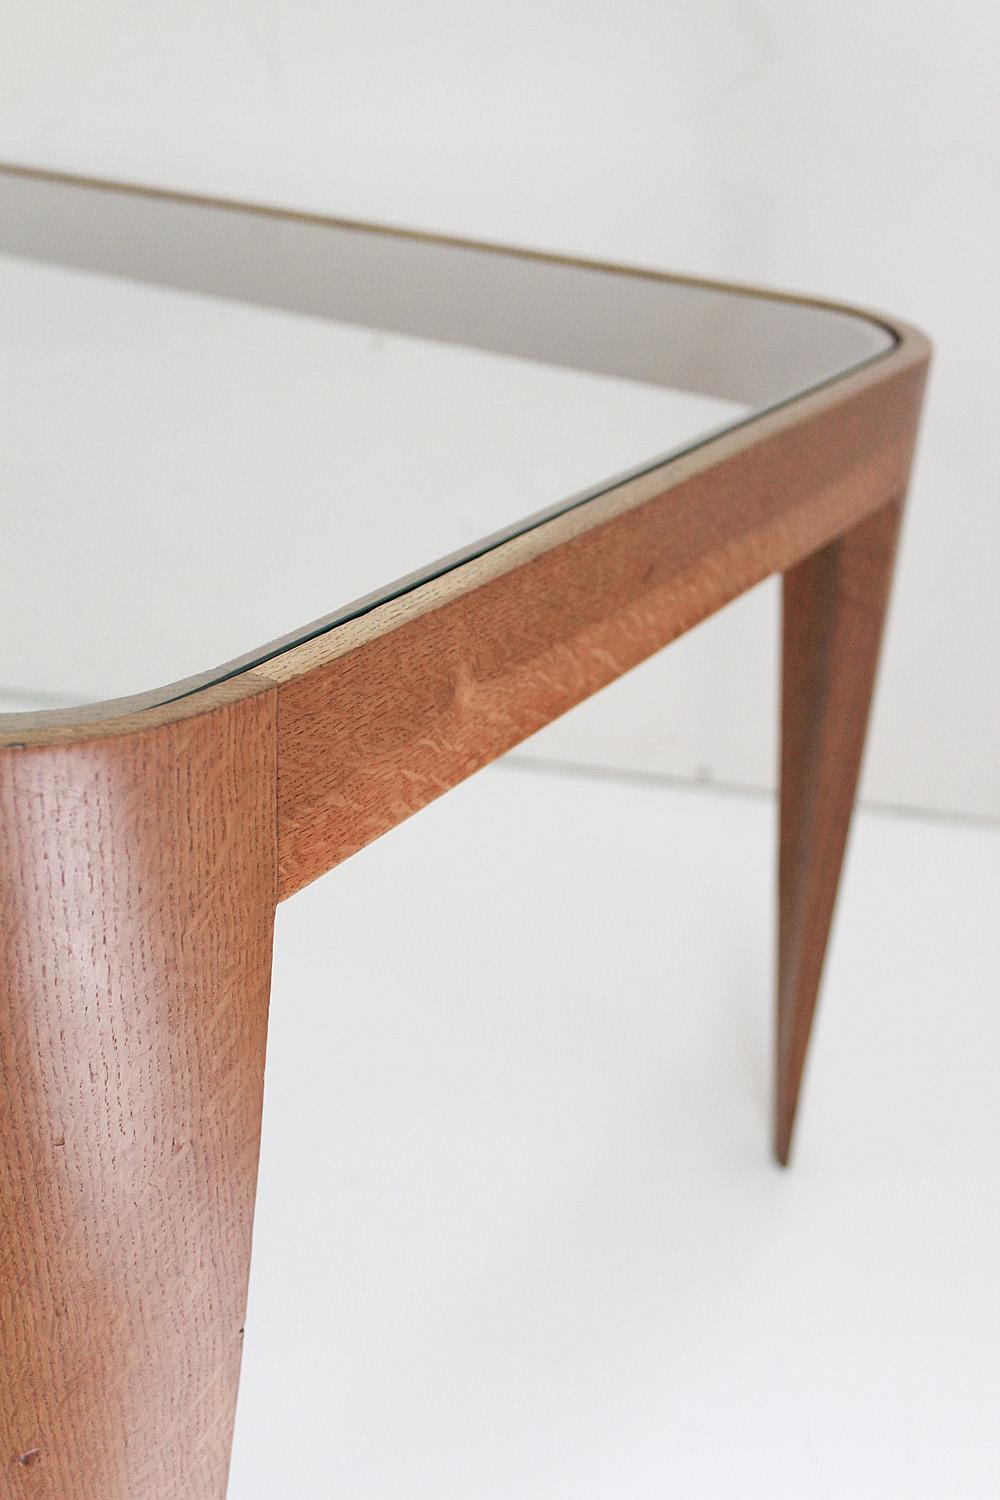 Oak and Glass Coffee Table by Gio Ponti, Italy 1940 1